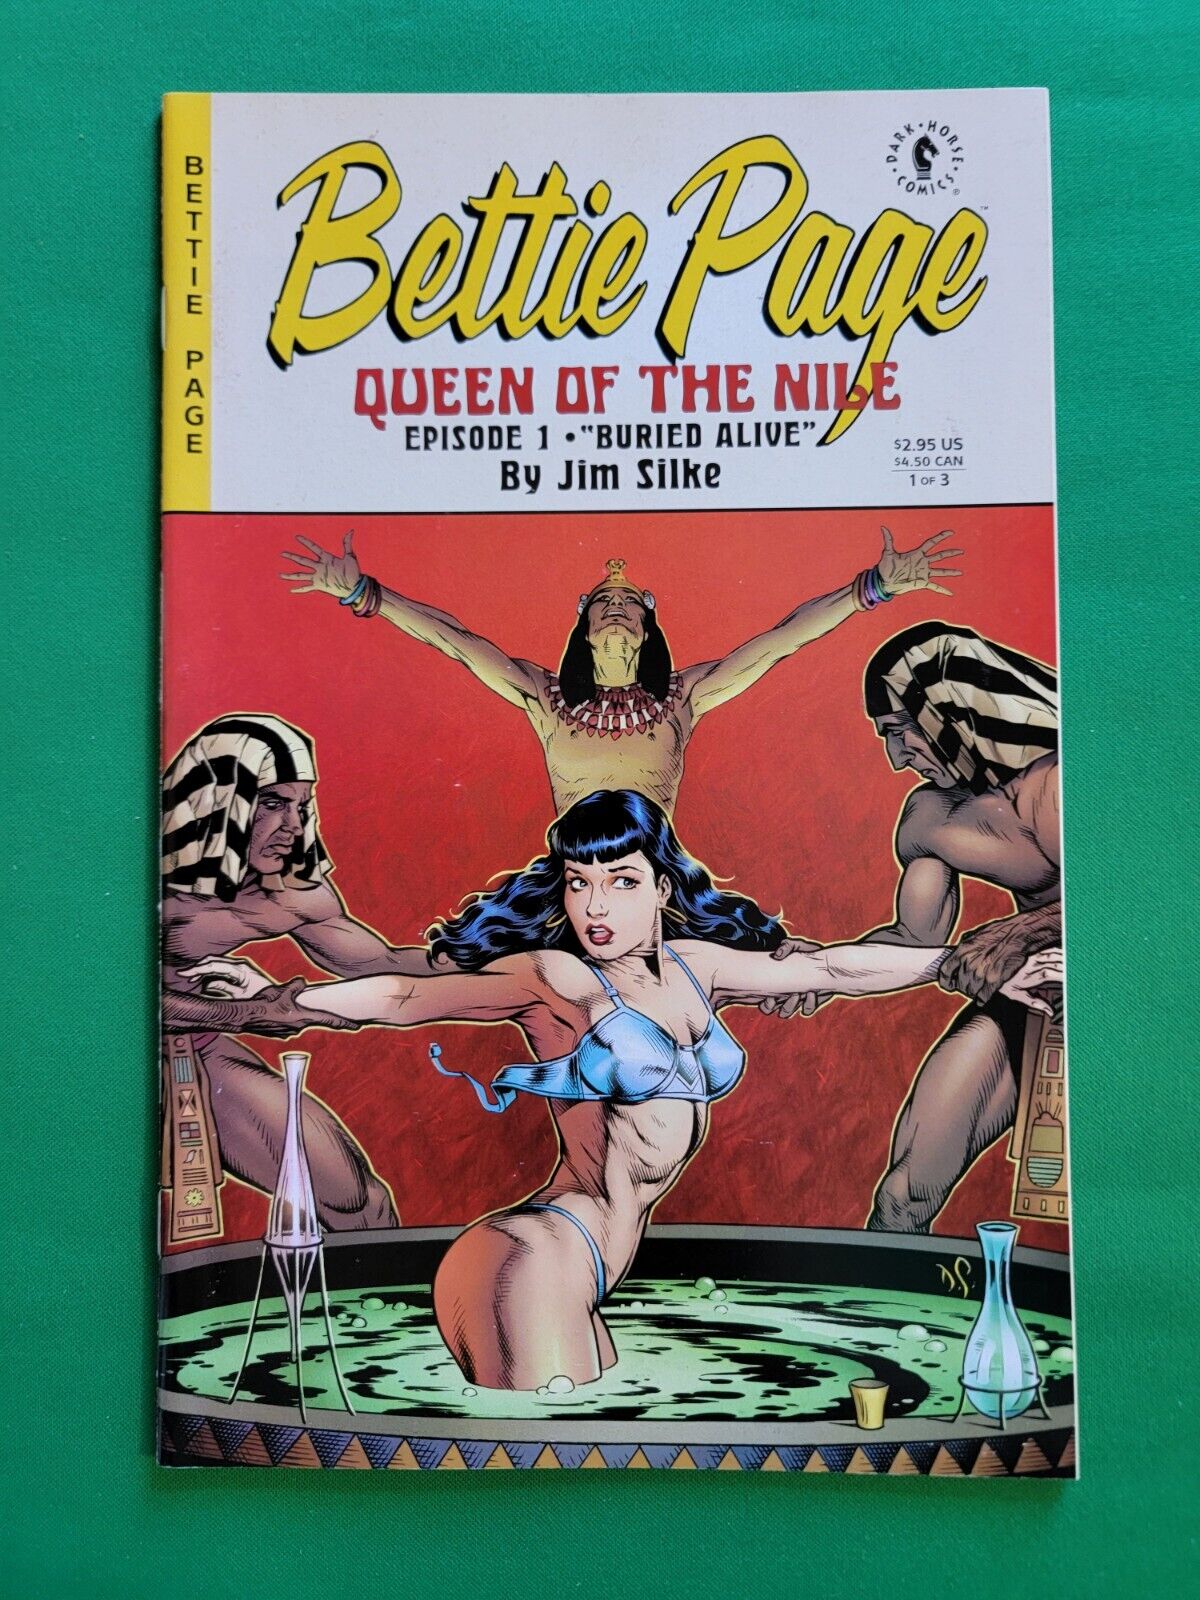 Bettie Page: Queen of the Nile #1 (Dark Horse Comics December 1999) Dave Stevens